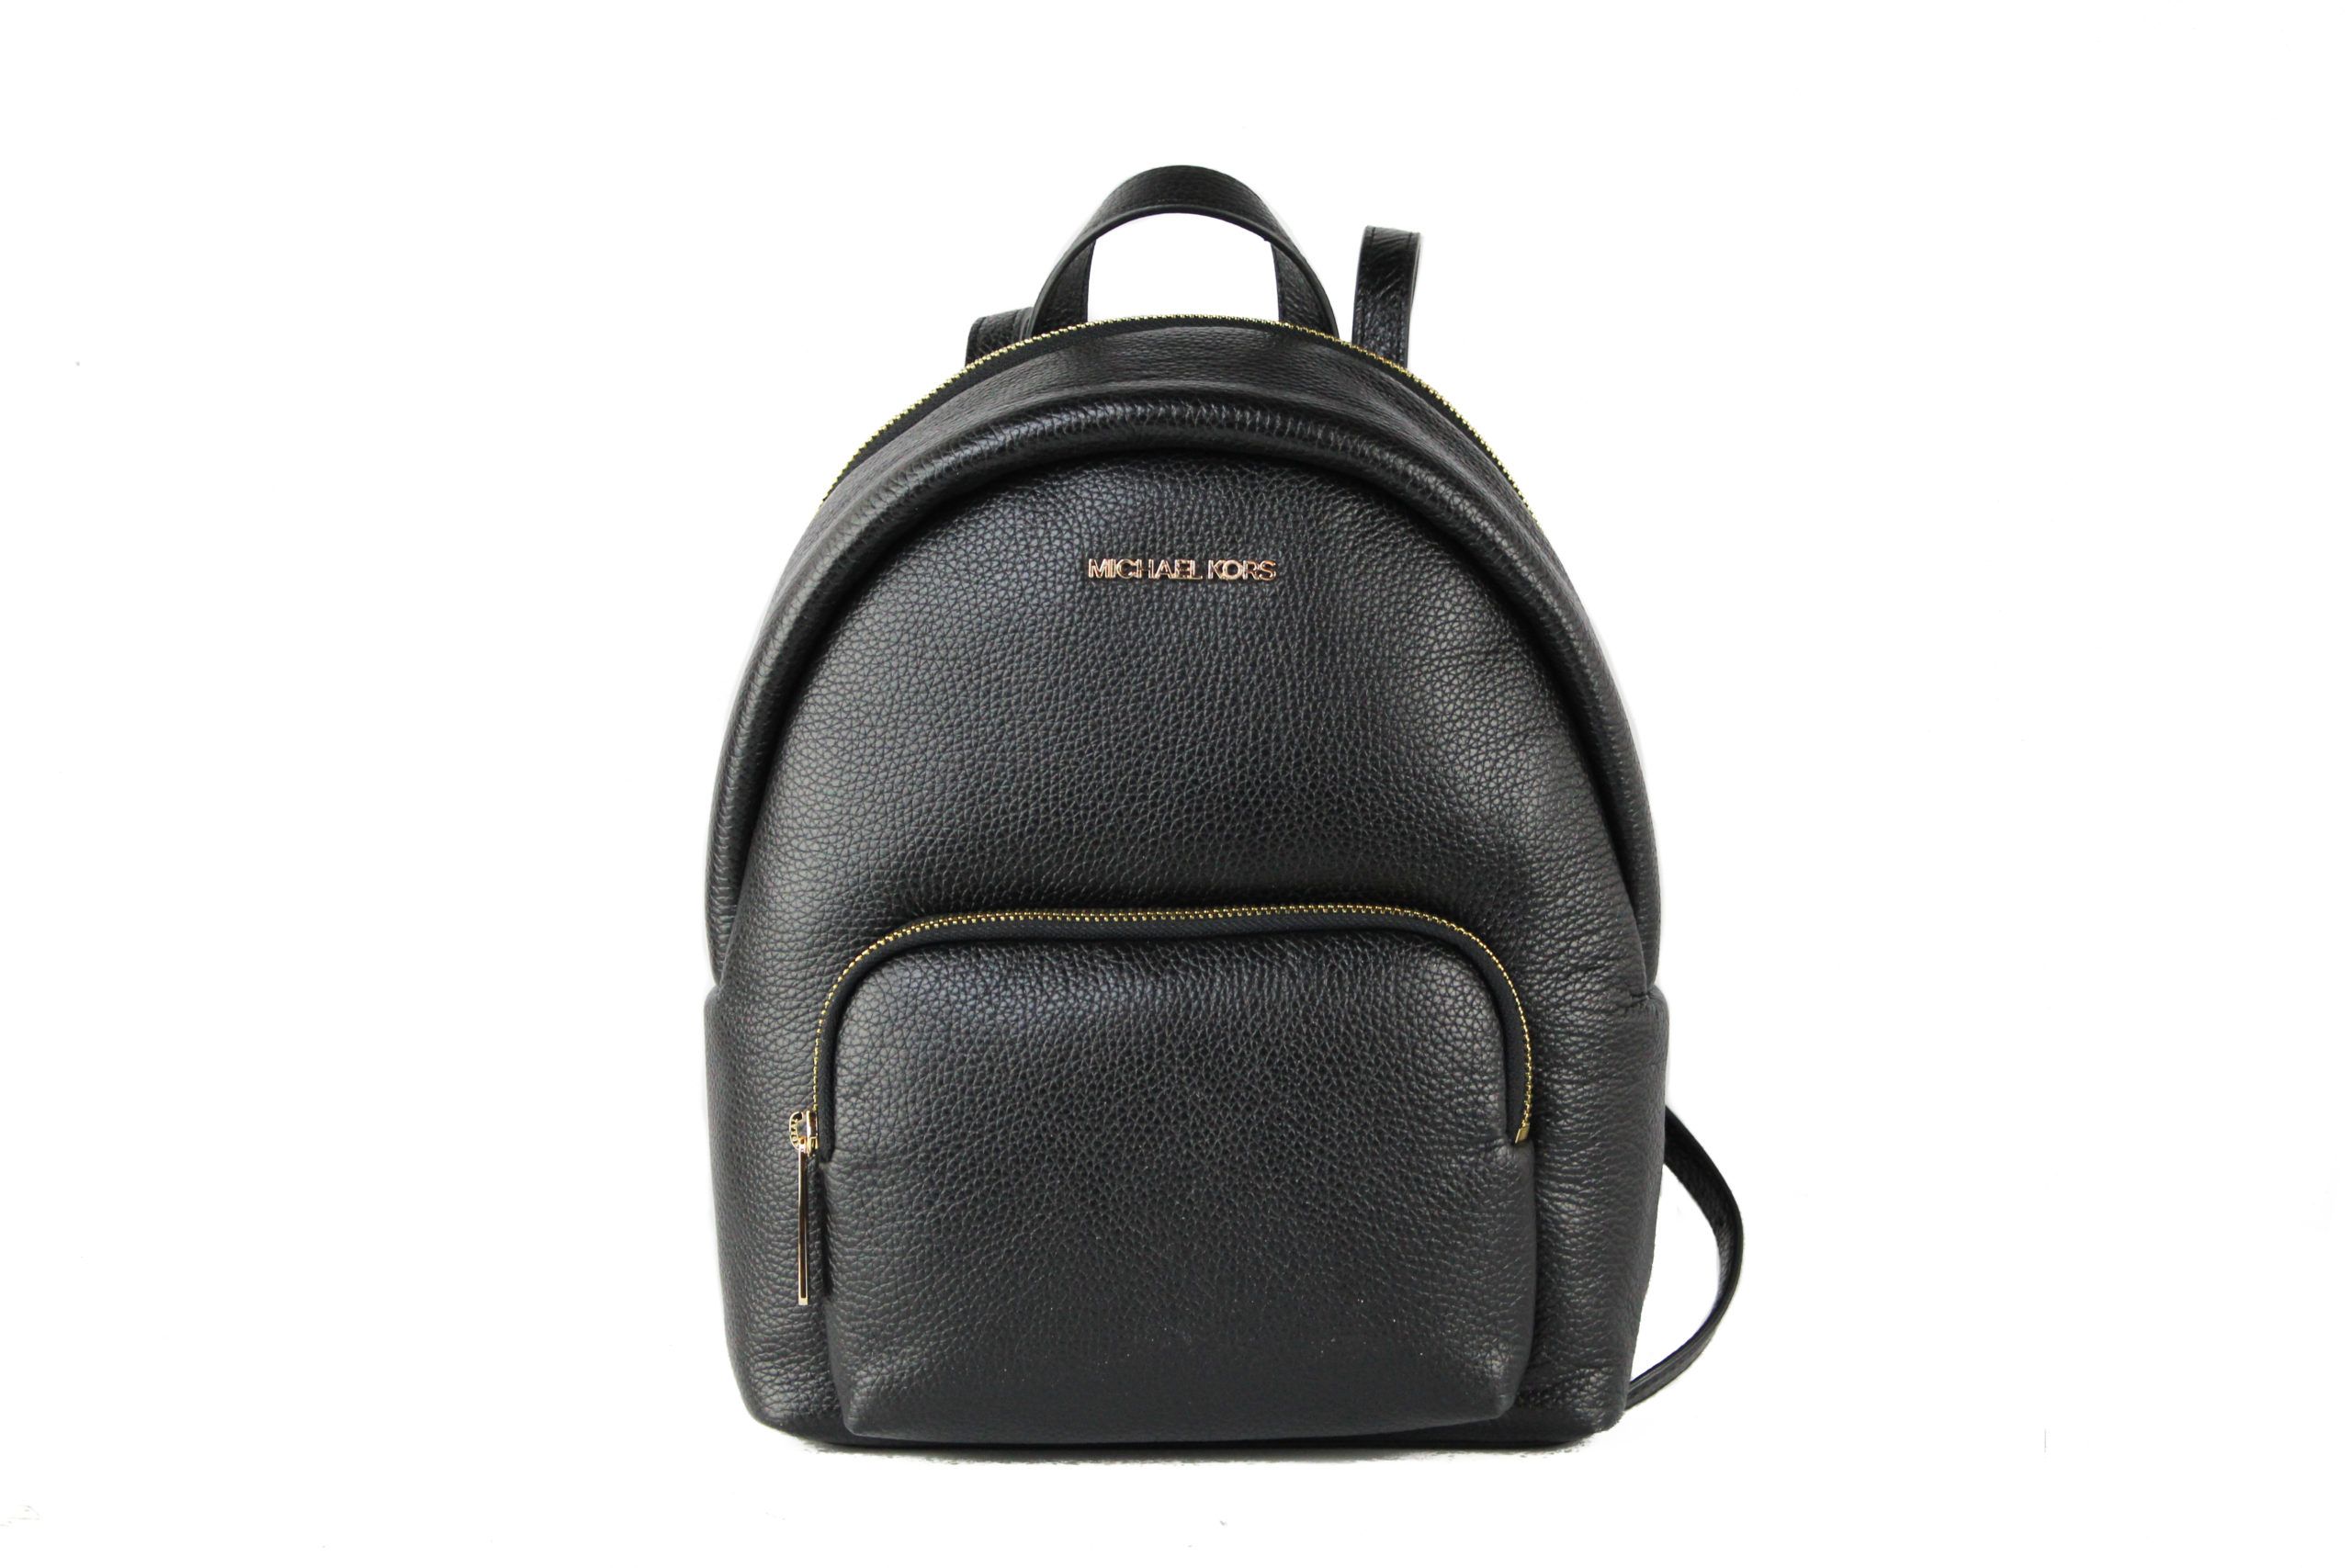 Brand New with Tags attached (100% Authentic). 
Style:. Michael Kors Erin Medium Leather Convertible Backpack (Black)
Material: PebbleLeather. 
Features: Inner Pockets, Exterior Zip Pocket, Adjustable/Convertible Straps. 
Measures: 26.67 cmL x 31.75 cm H x 12.7 cm D.